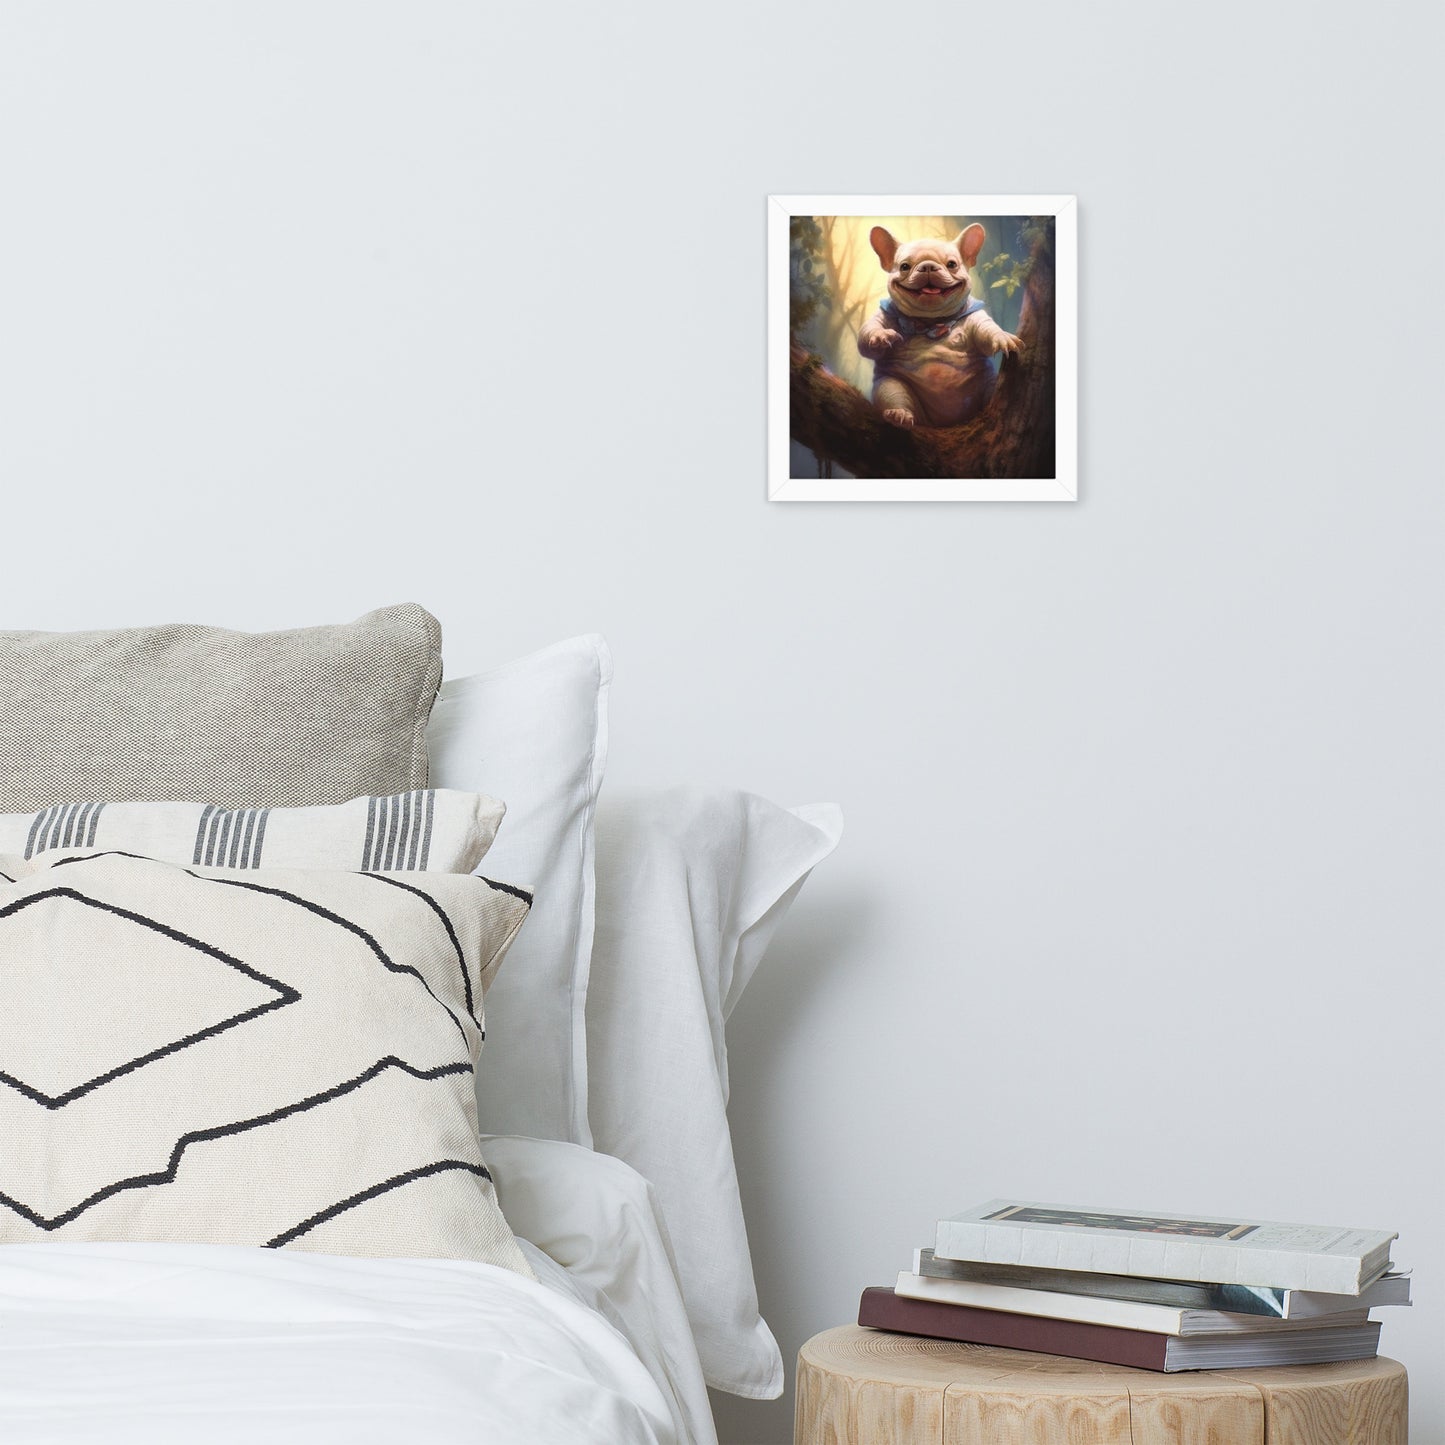 Koala Frenchie Framed Poster - An Adorable and Artistic Choice for Pet Lovers and Koala Admirers